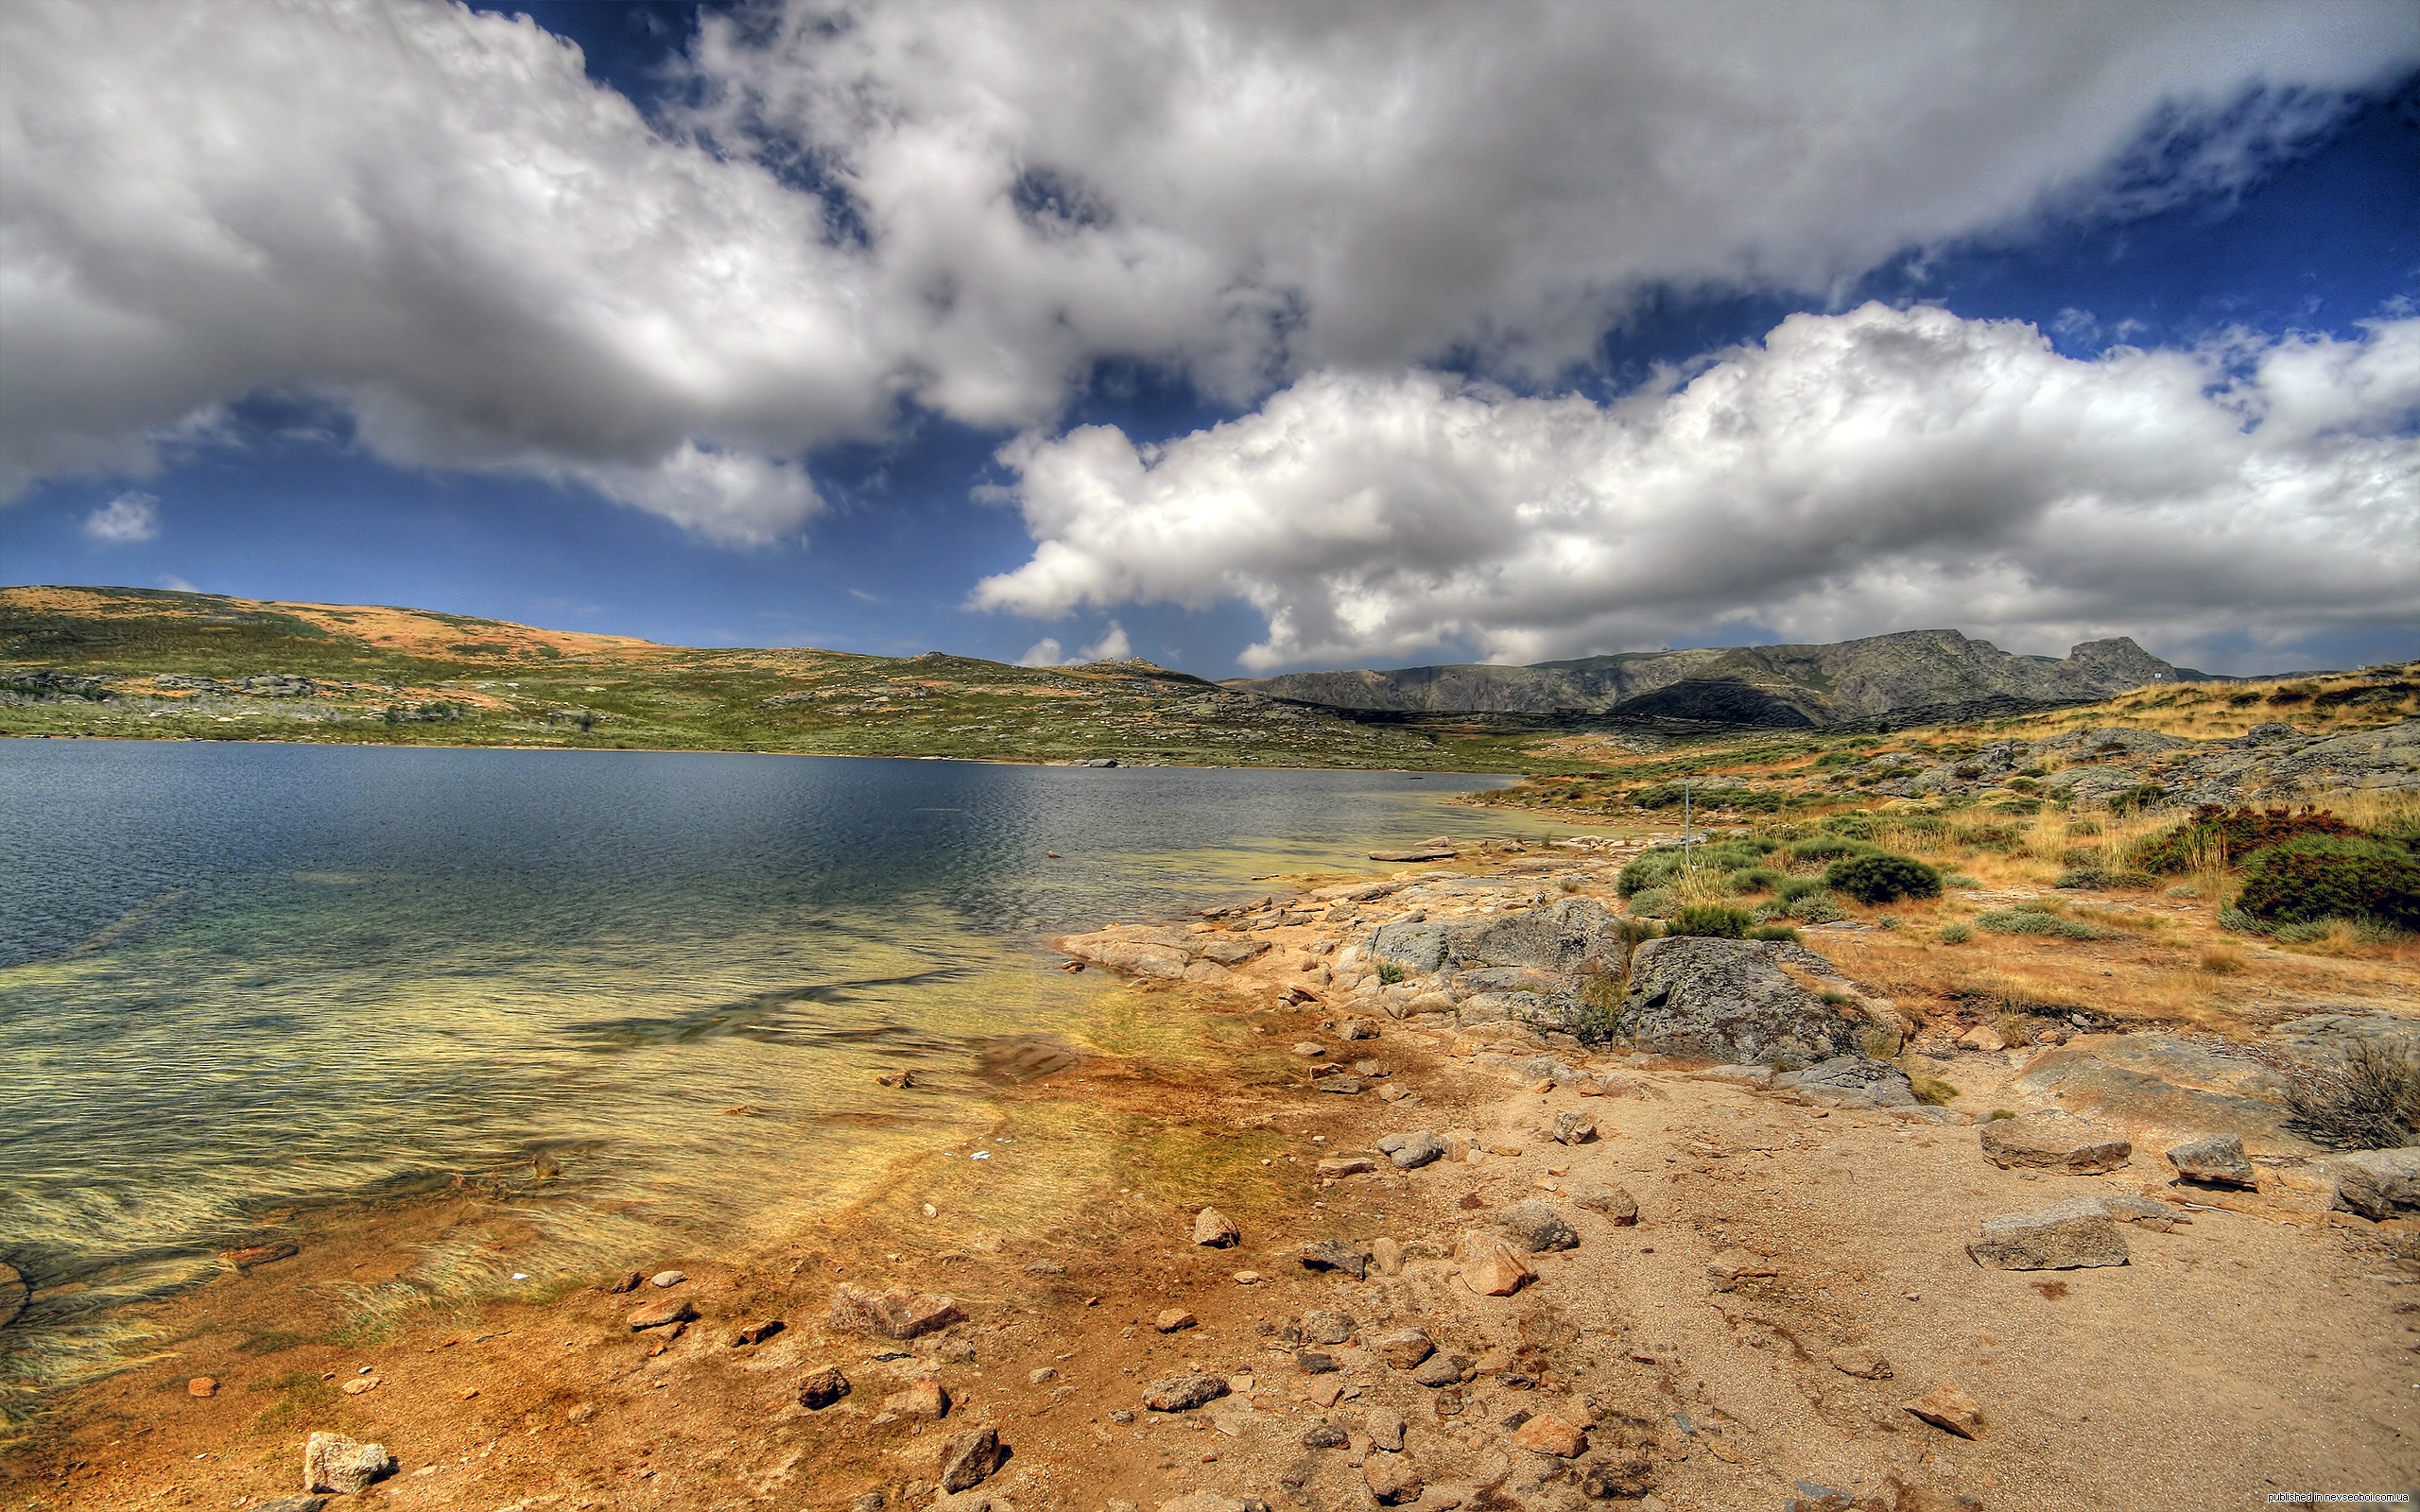 Mountain landscape by a serene lake with a cloudy sky